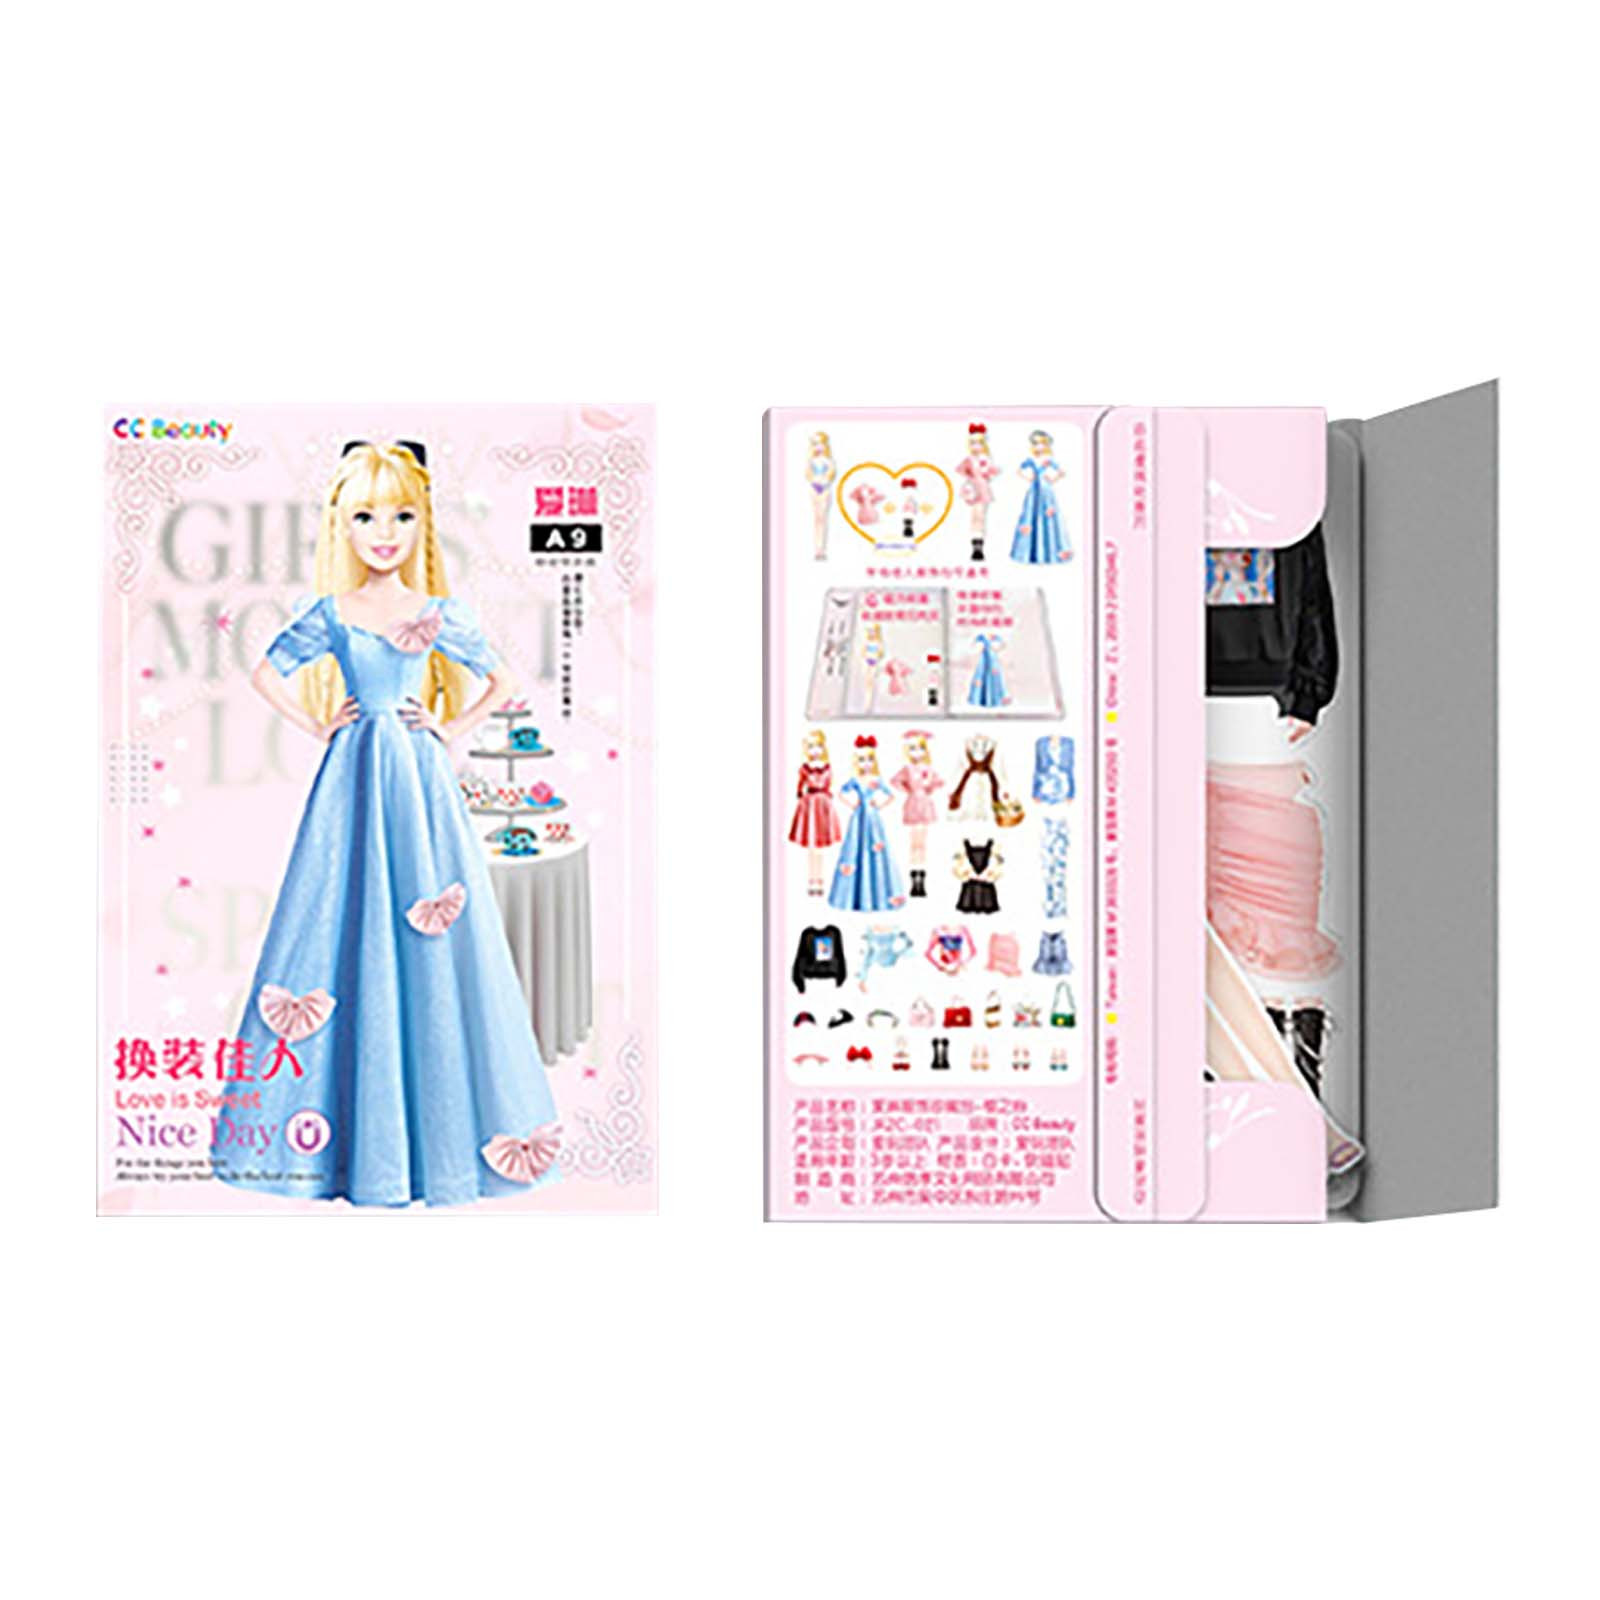 TUWABEII Games and Puzzles for Kids,Magnetic Dress Up Baby Magnetic Princess Dress Up Paper Doll Magnet Dress Up Pretend And Play Travel Playset Toy Magnetic Dress Up Dolls For Girls Kid's Gift - image 3 of 6